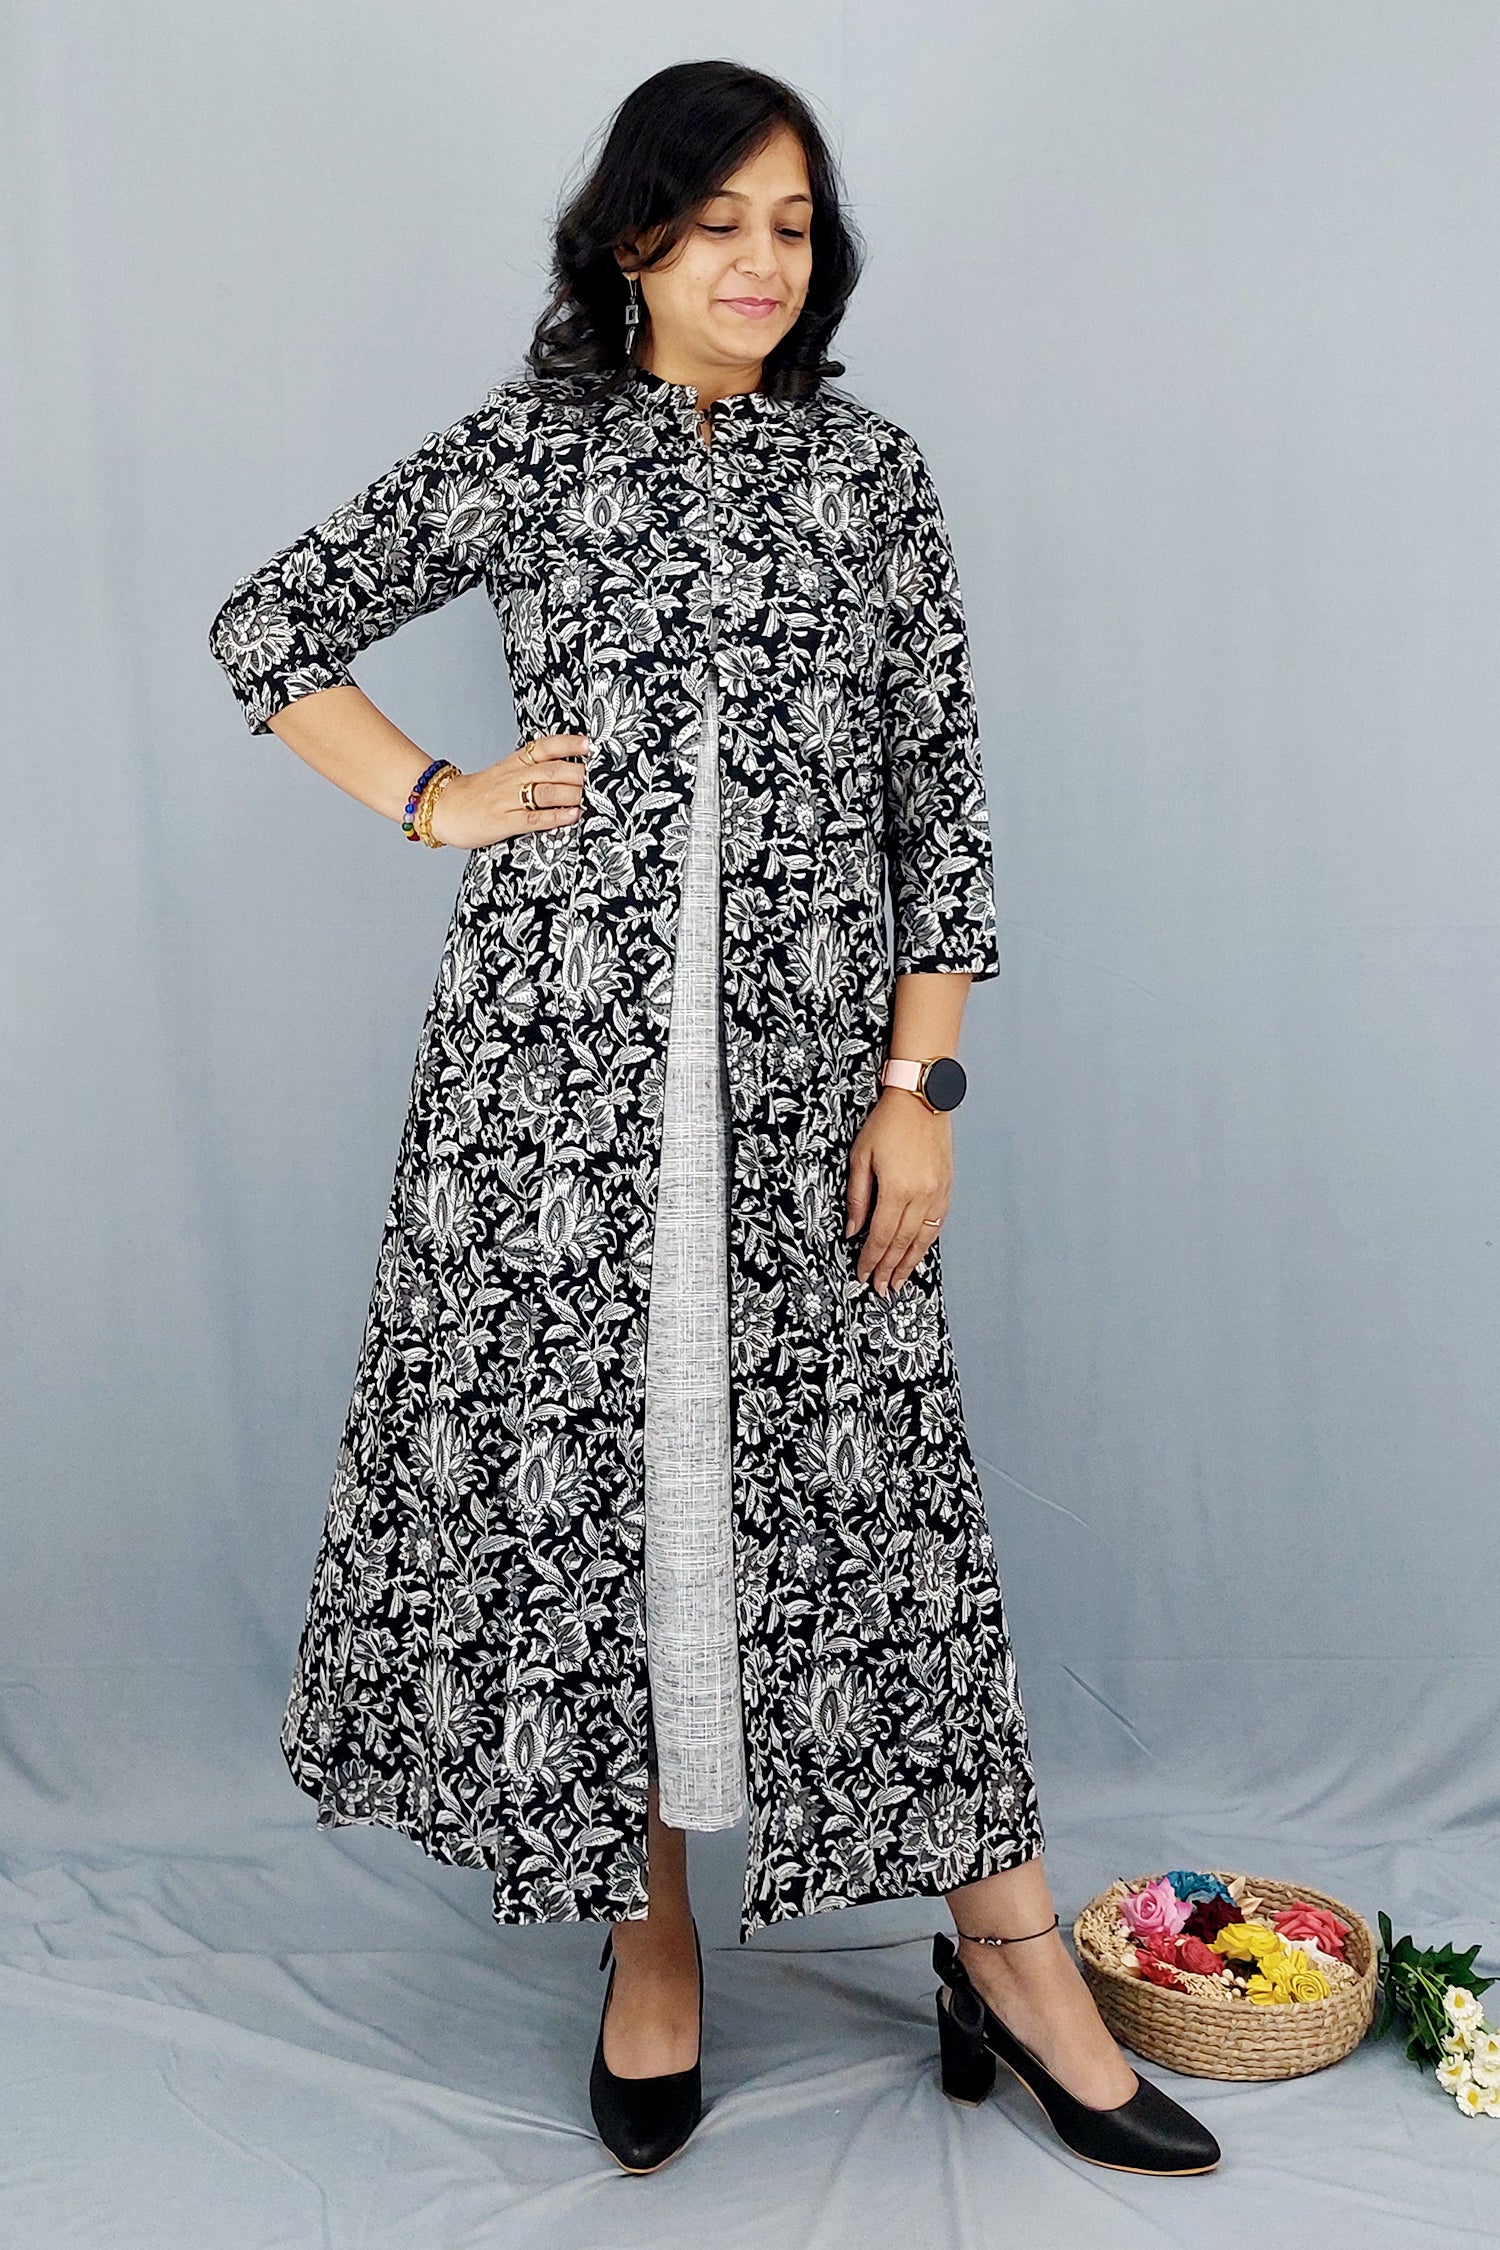 Kurti With Shrugs - Buy Kurti With Shrugs online at Best Prices in India |  Flipkart.com